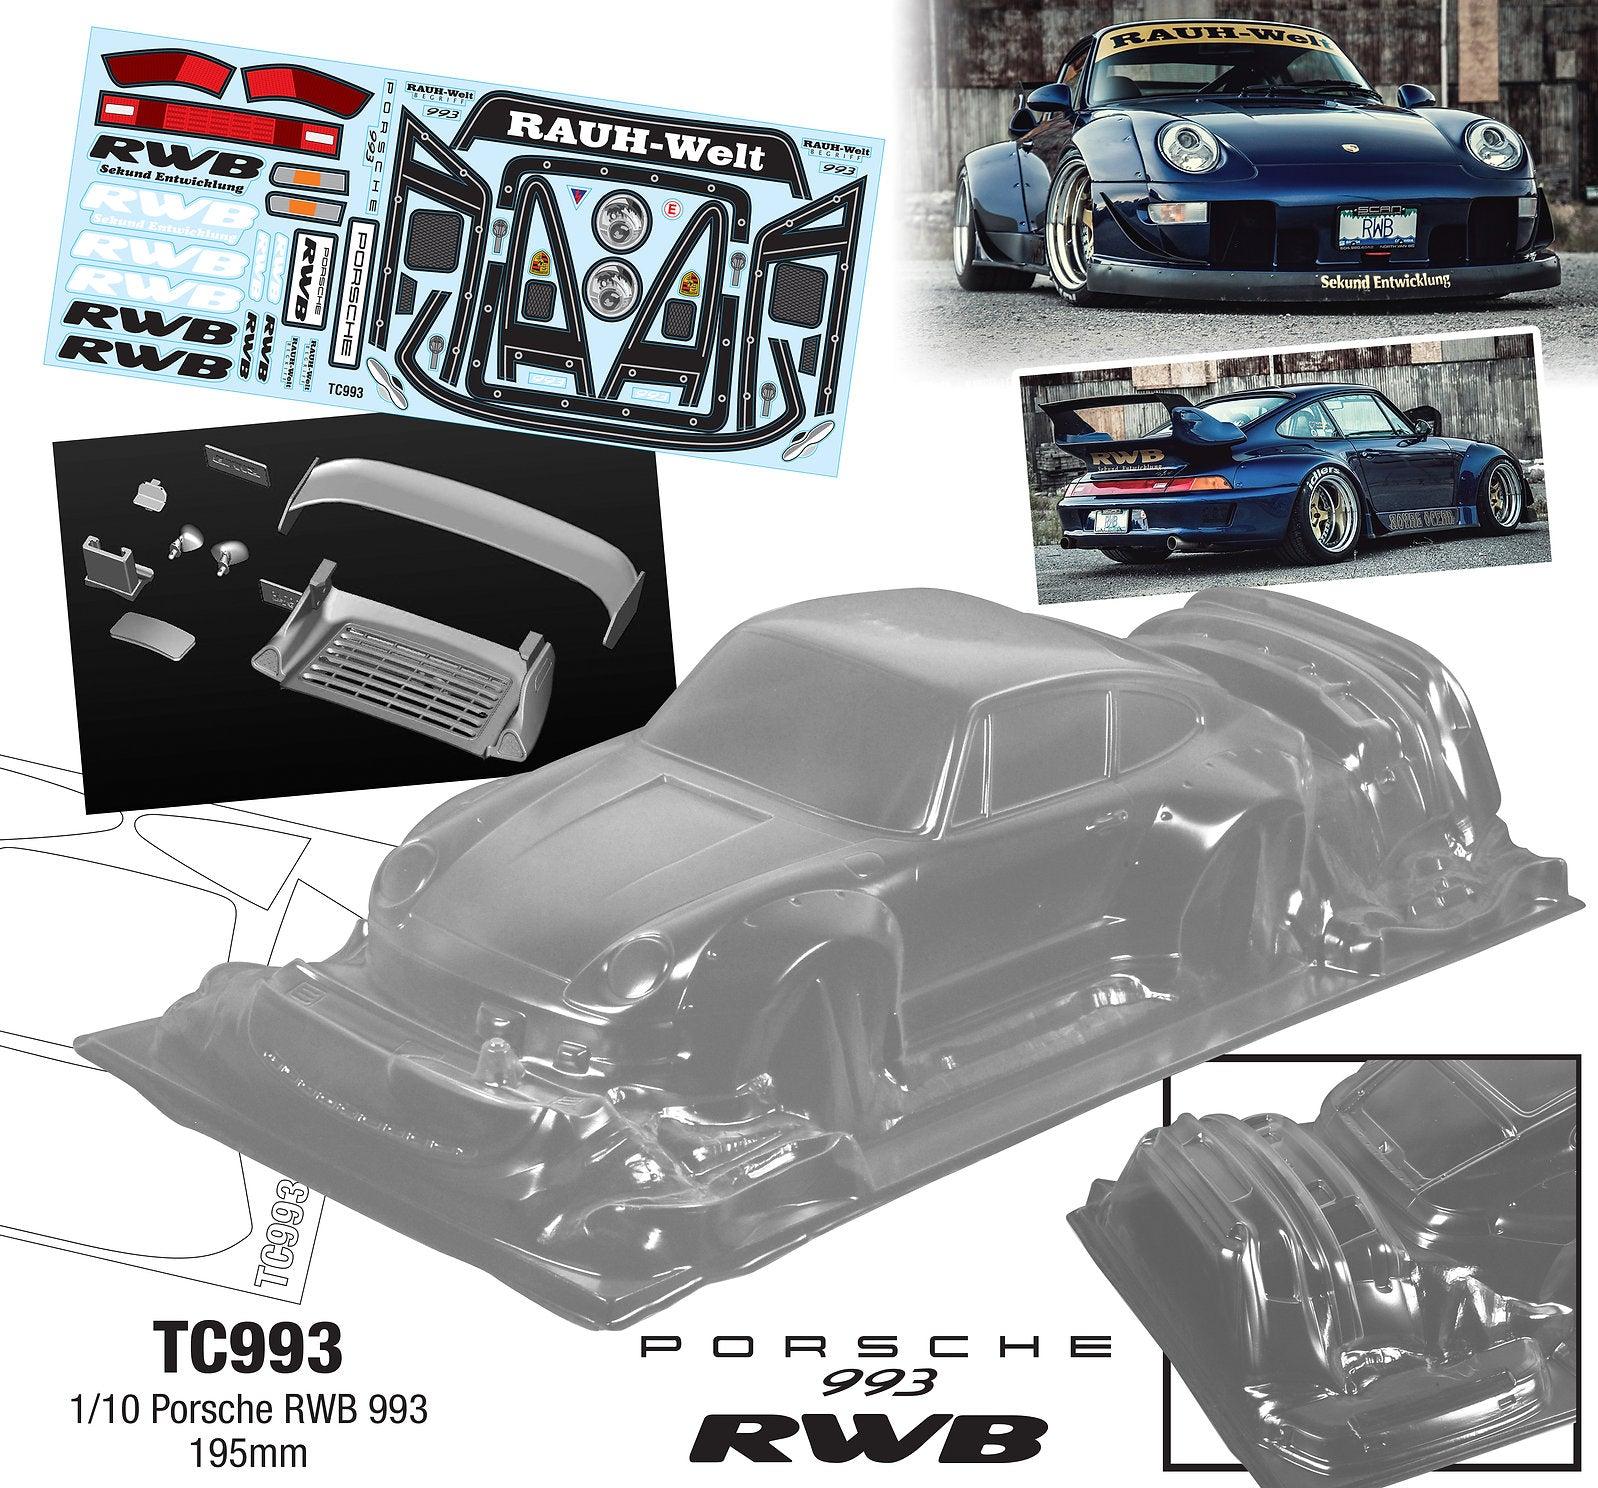 Tamiya Rc Porsche: A High-Speed RC Porsche for Collectors and Enthusiasts 